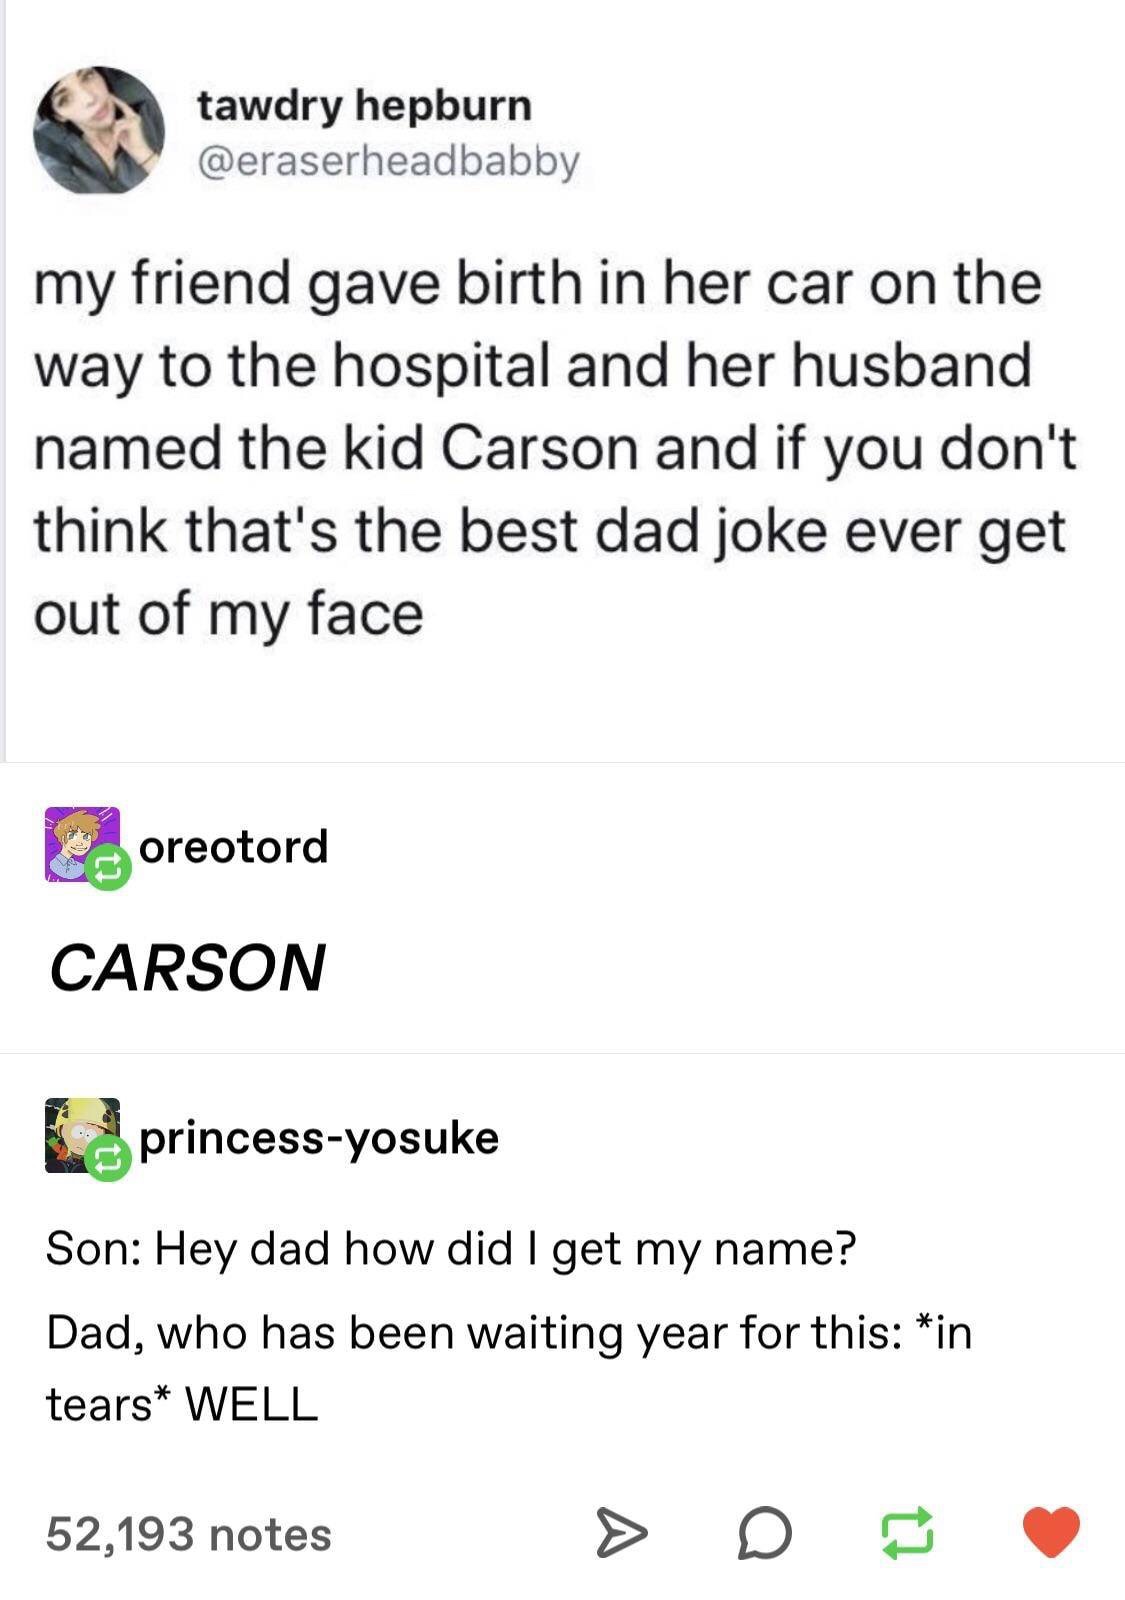 document - tawdry hepburn my friend gave birth in her car on the way to the hospital and her husband named the kid Carson and if you don't think that's the best dad joke ever get out of my face C oreotord Carson princessyosuke Son Hey dad how did I get my